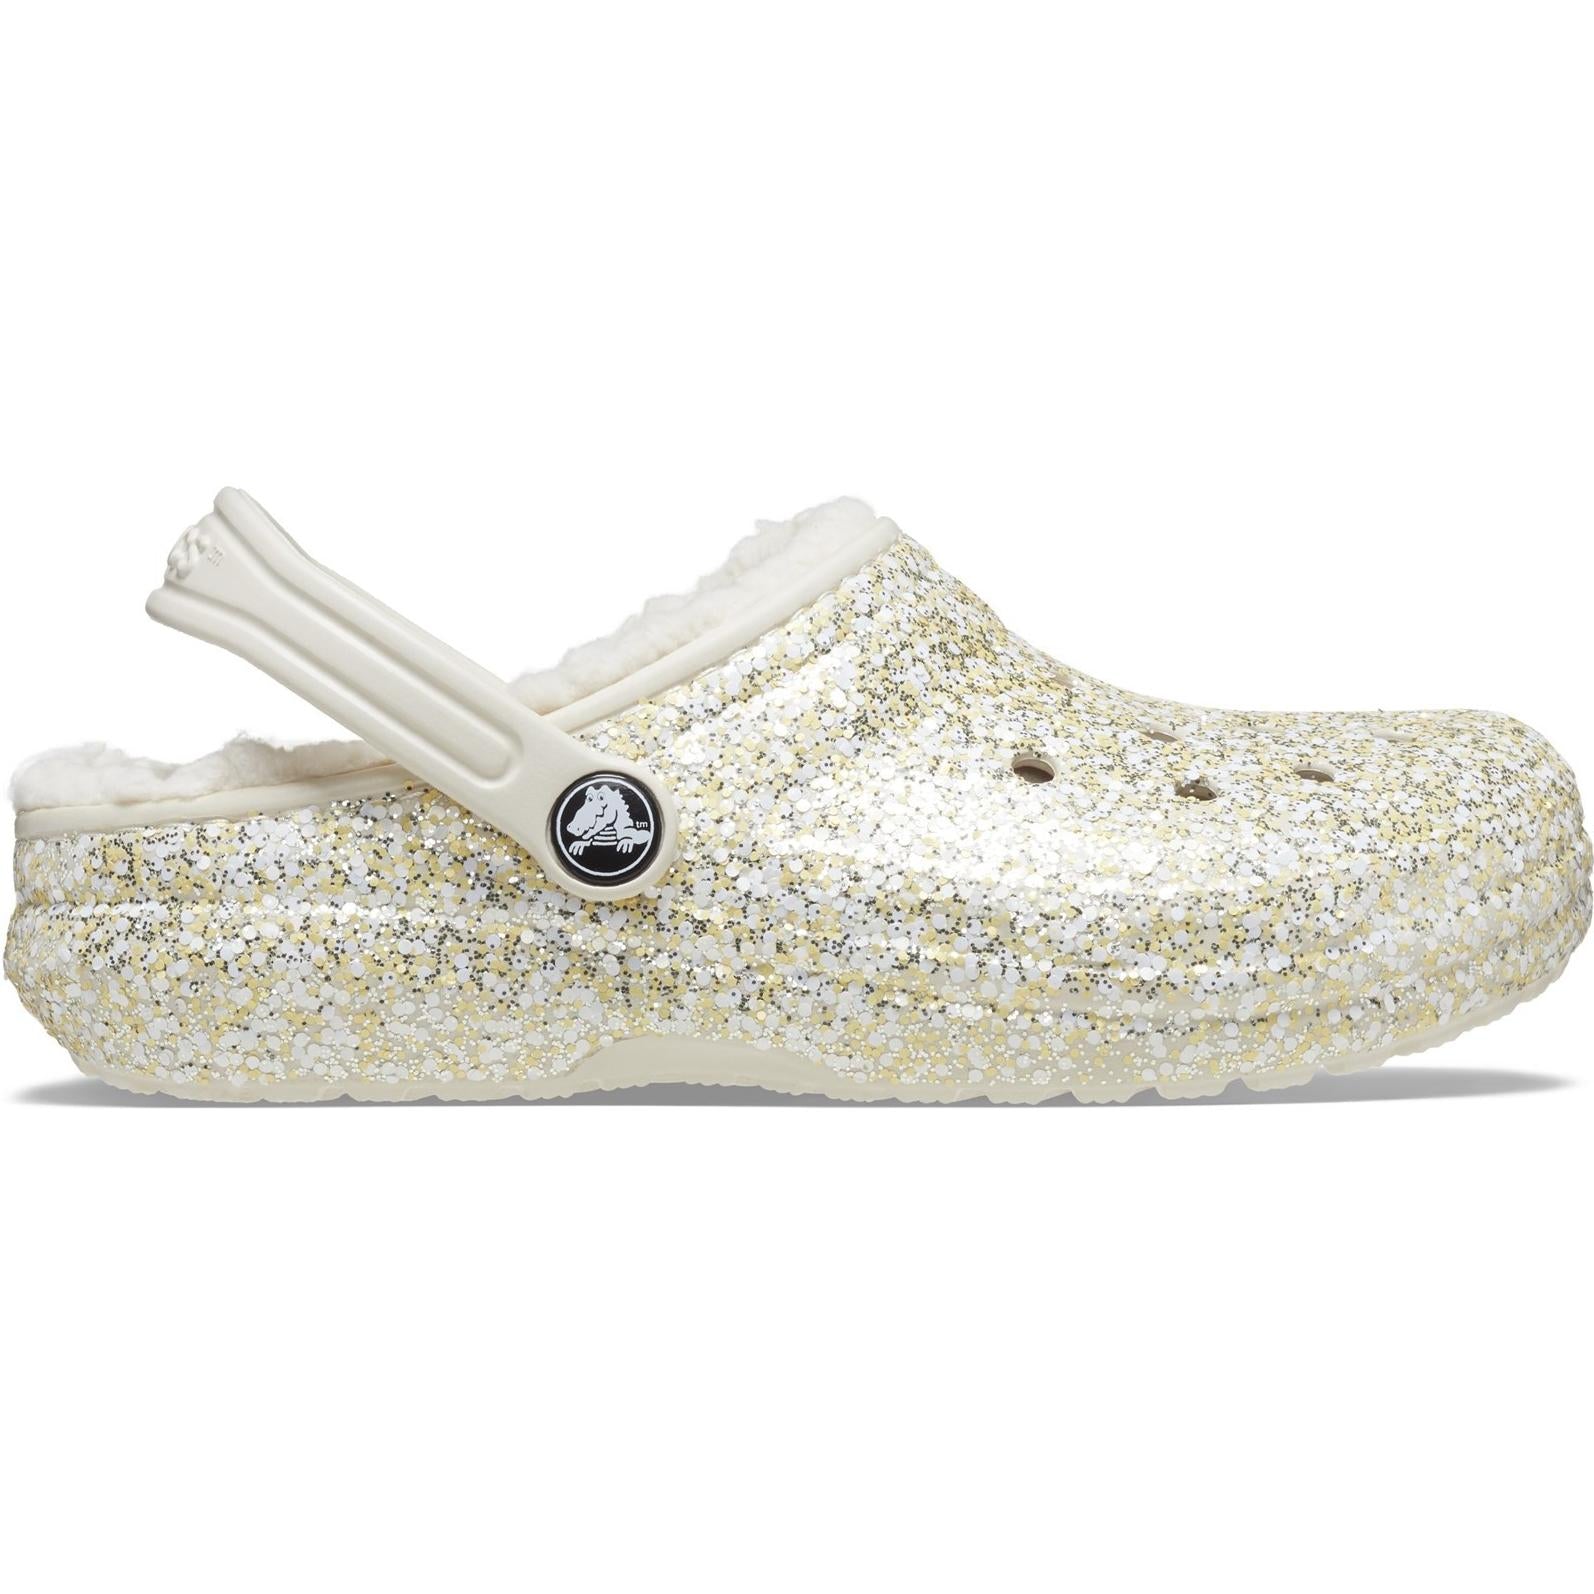 Crocs Toddlers' Classic Glitter Lined Clog Sandals